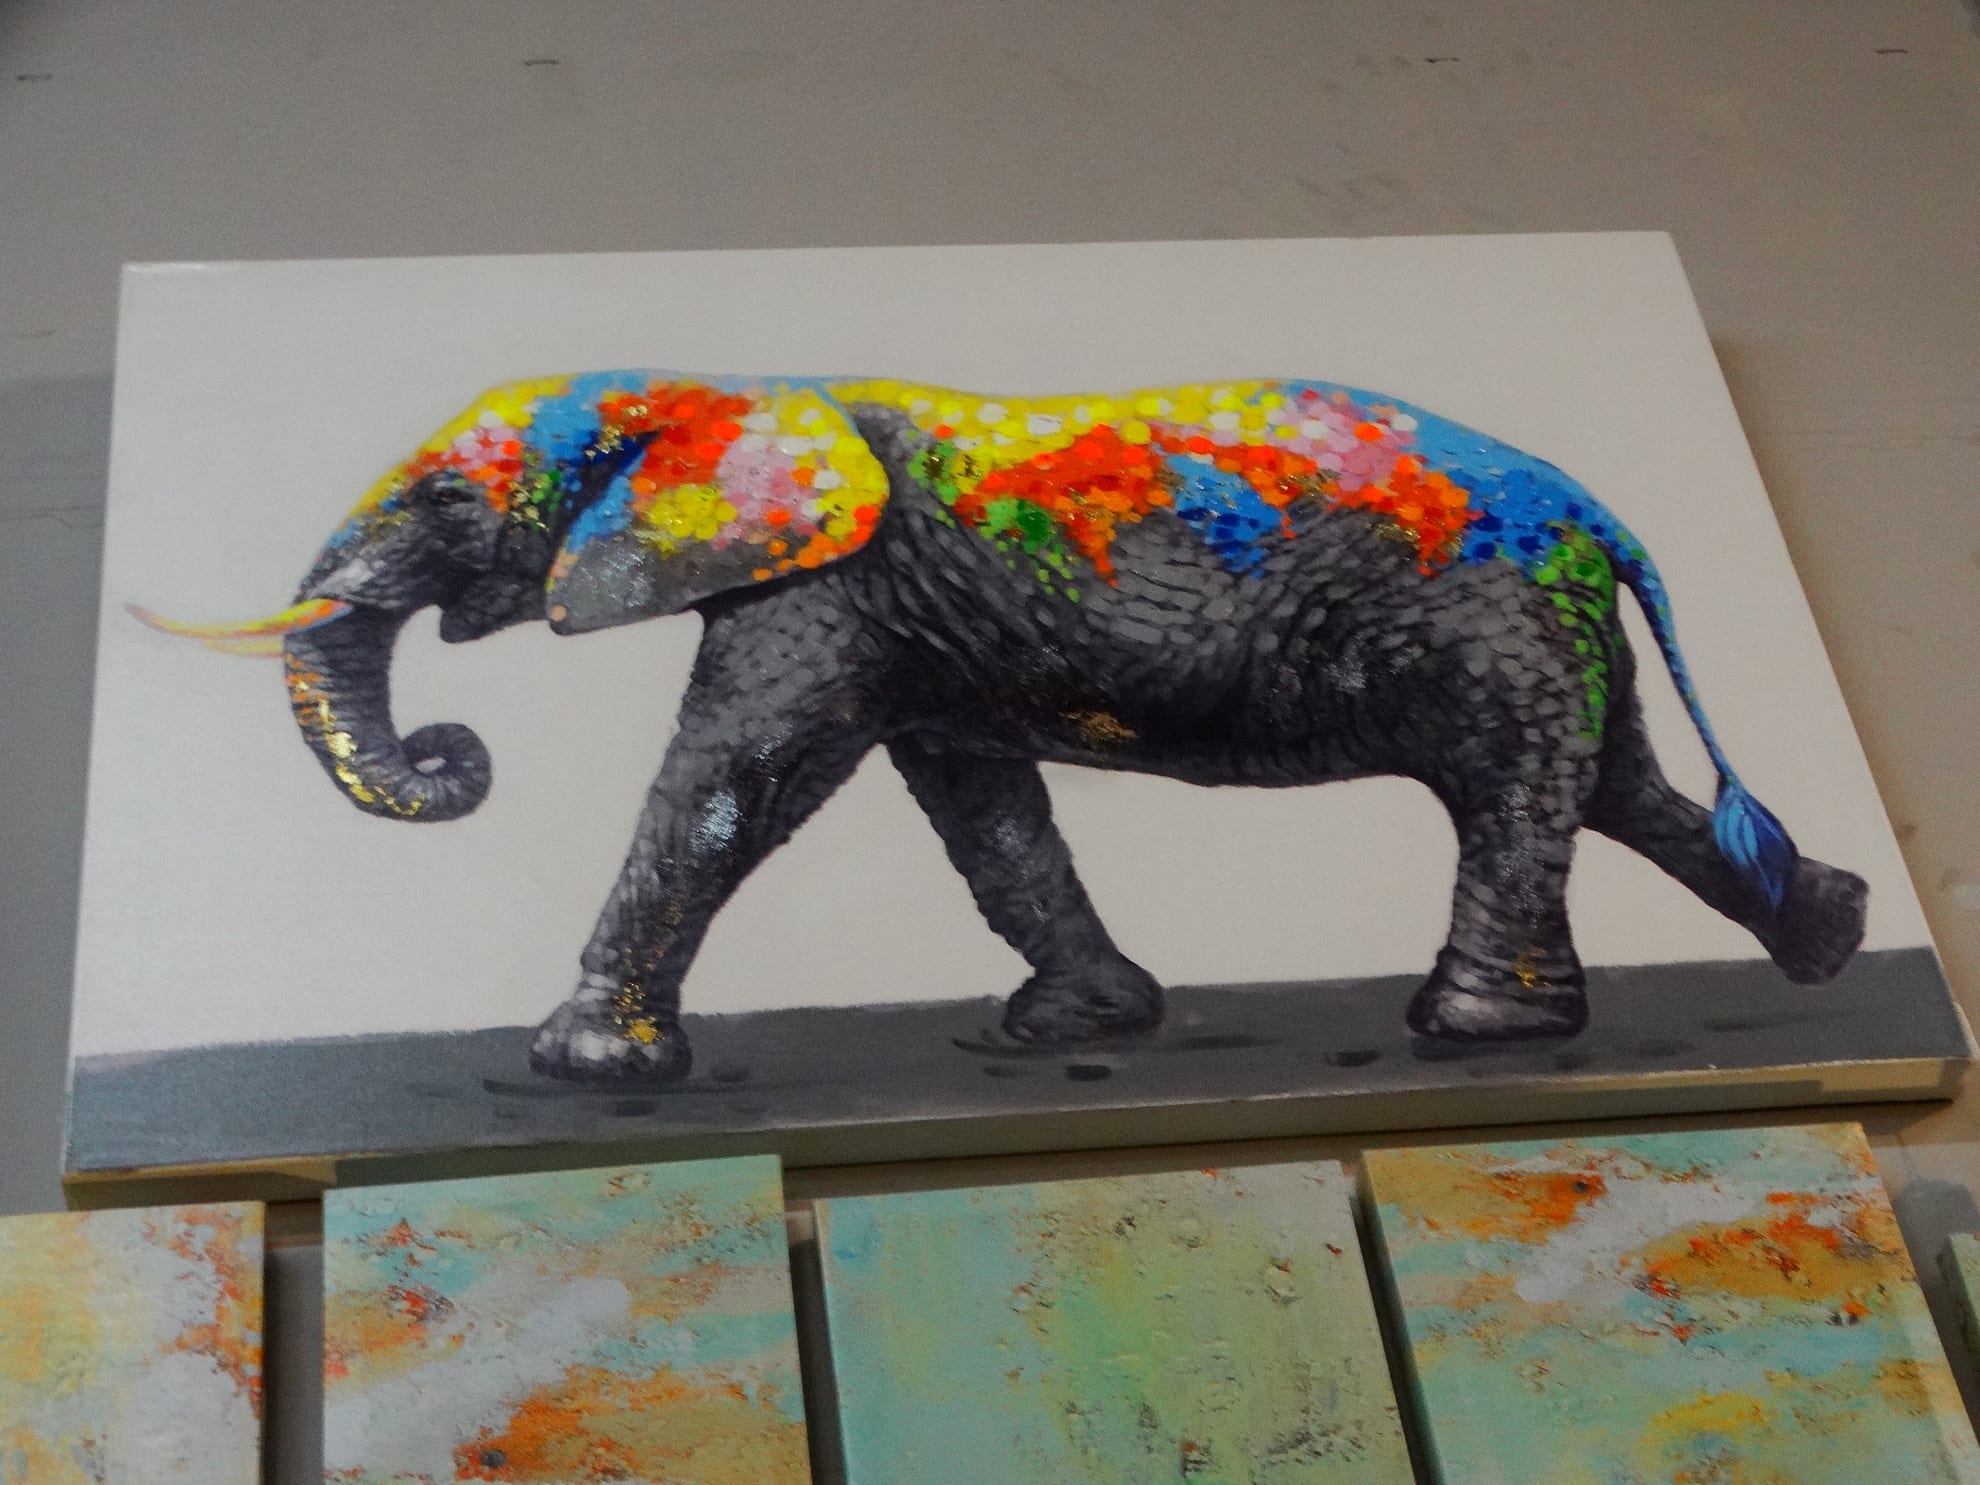 Elephant Wall Art This Wall Art Painting Of A Colorful Elephant Is Sweet The Grey Hues Contrasted By All The Color Gives It Artsy Appeal A Perfect Piece For The Elephant Lover